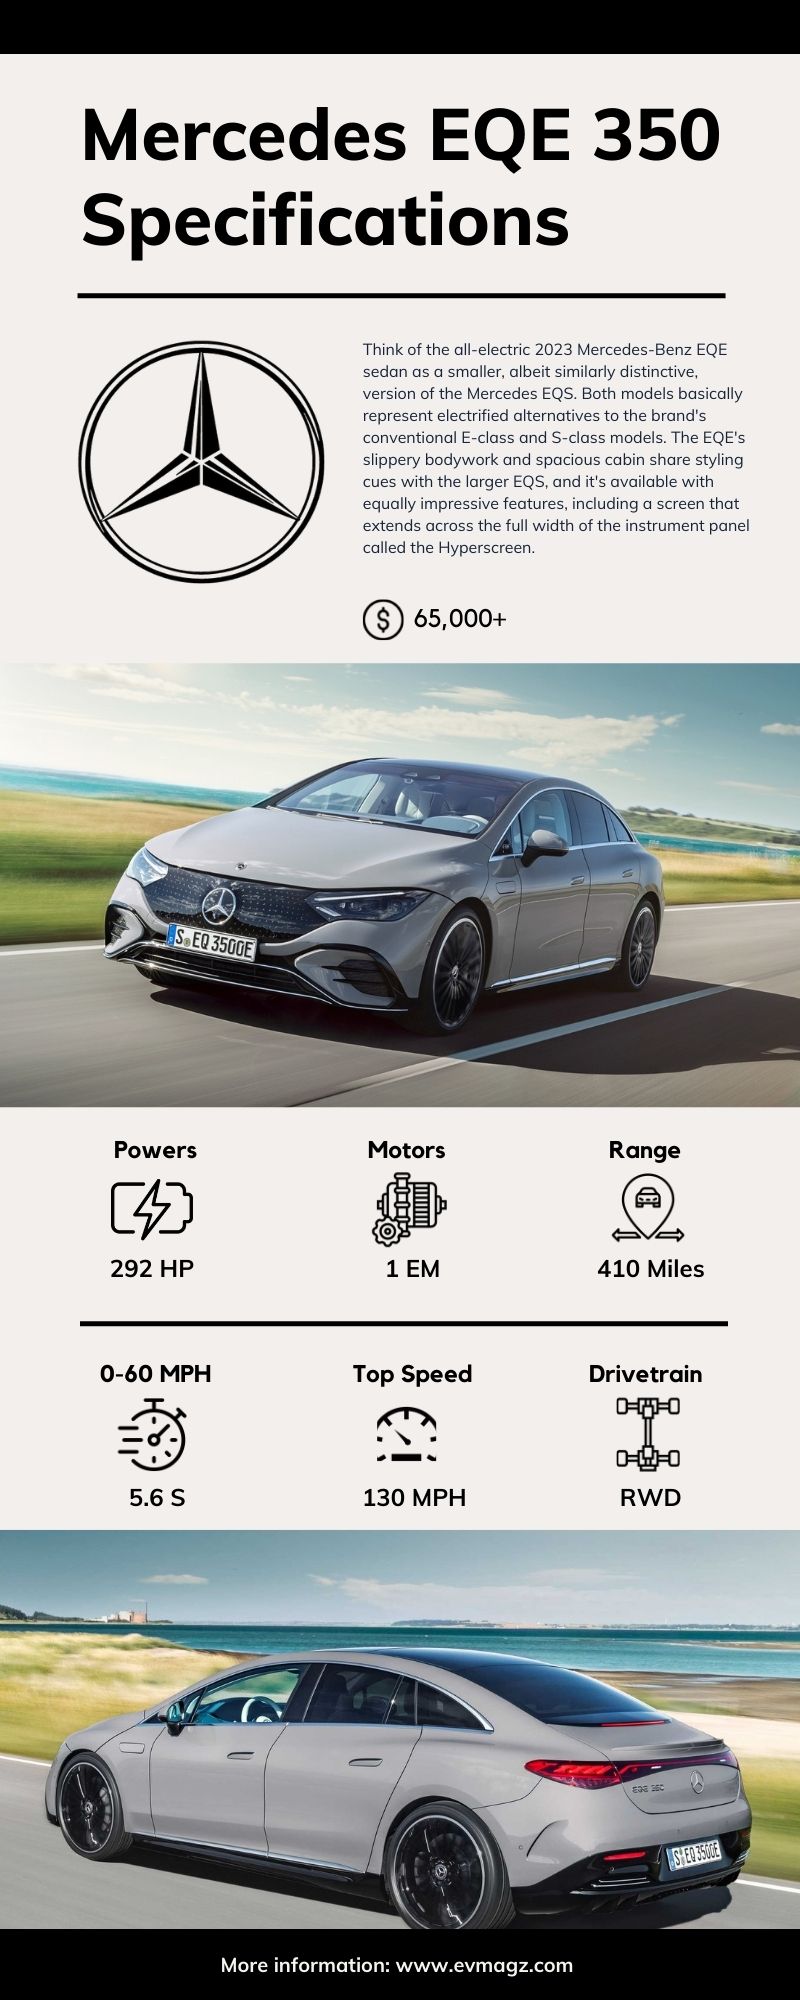 Mercedes EQE 350 Specifications Infographic - Mercedes EQE 350 Price and Specifications [Infographic]